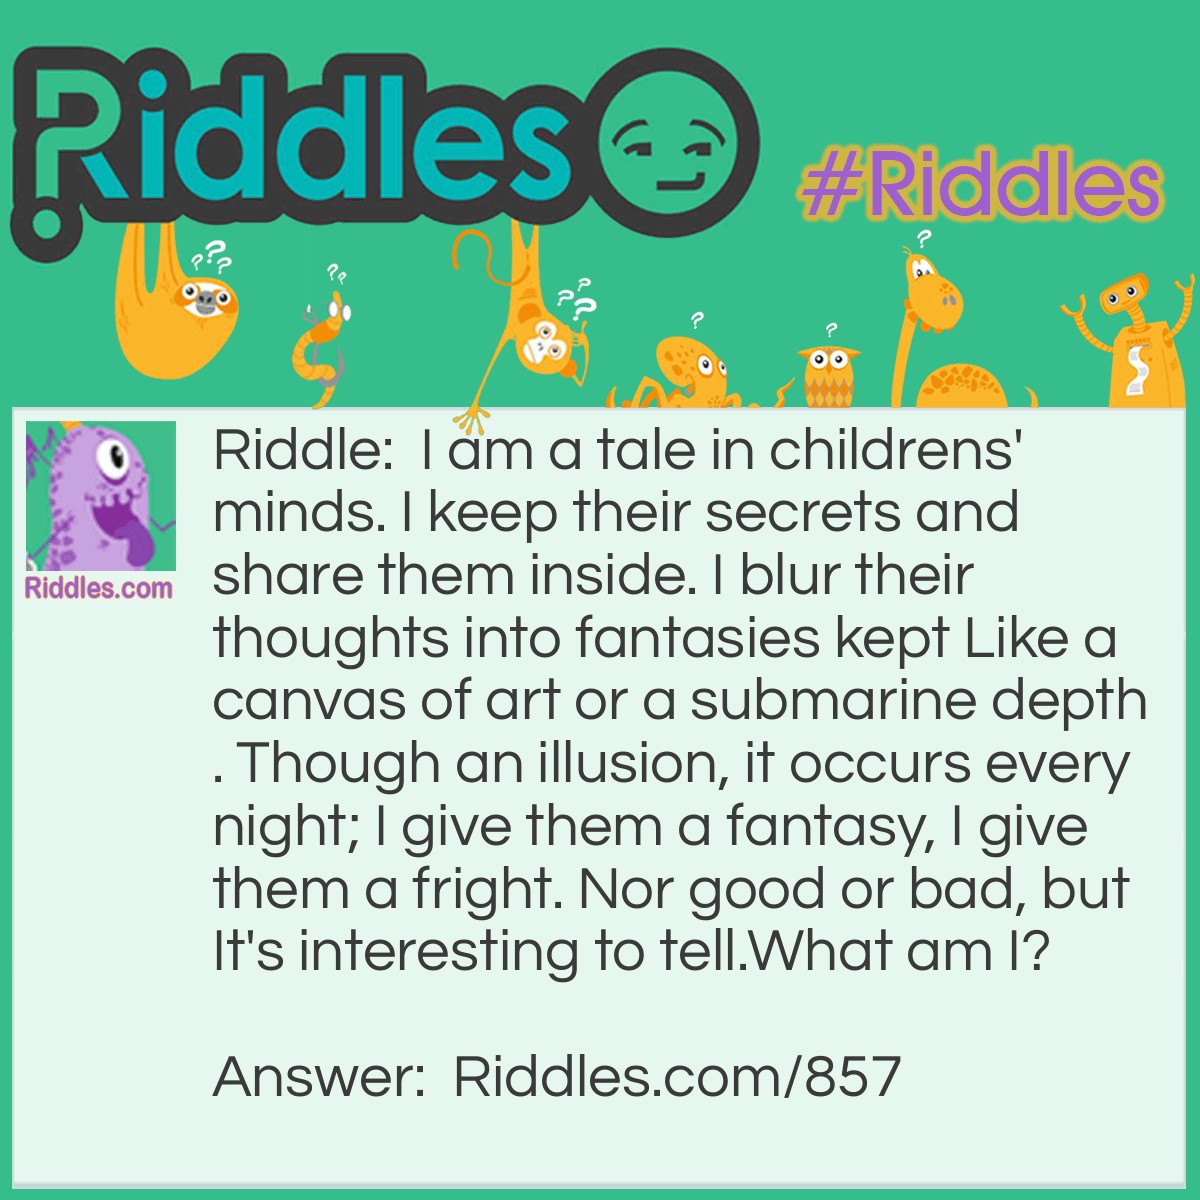 Riddle: I am a tale in childrens' minds. I keep their secrets and share them inside. I blur their thoughts into fantasies kept Like a canvas of art or a submarine depth. Though an illusion, it occurs every night; I give them a fantasy, I give them a fright. Nor good or bad, but It's interesting to tell.
What am I? Answer: I am a dream.